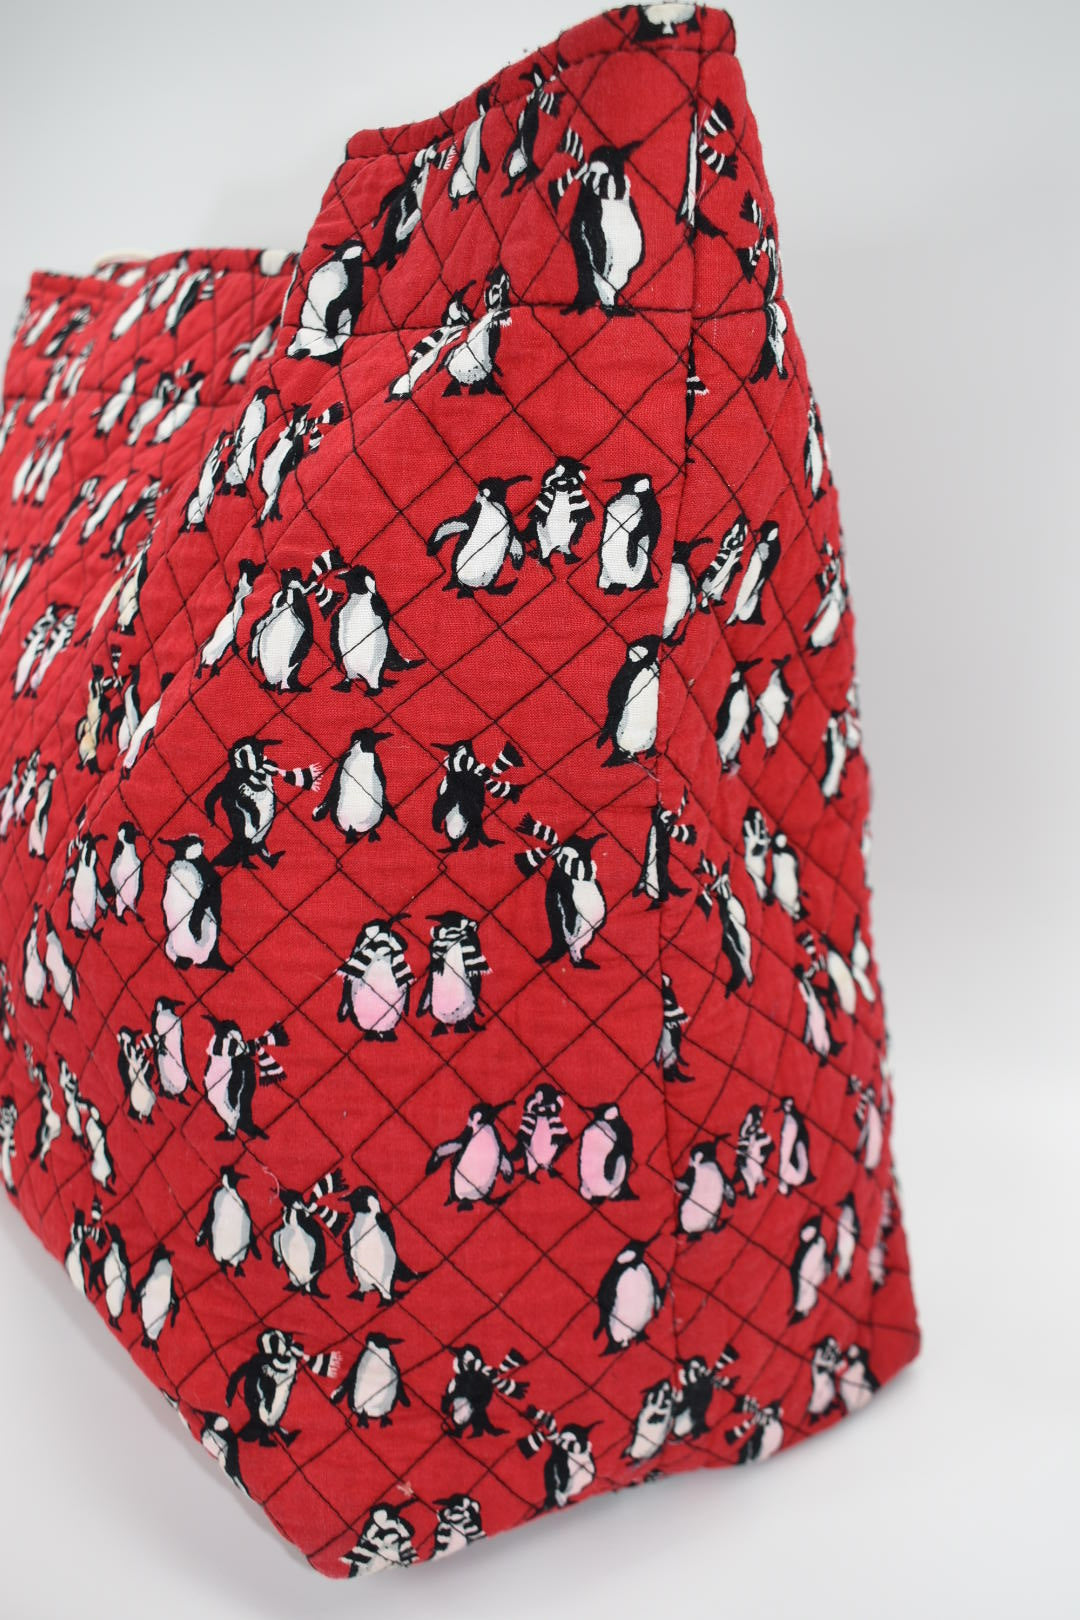 Vera Bradley Iconic Grand Tote Bag in "Playful Penguins Red" Pattern